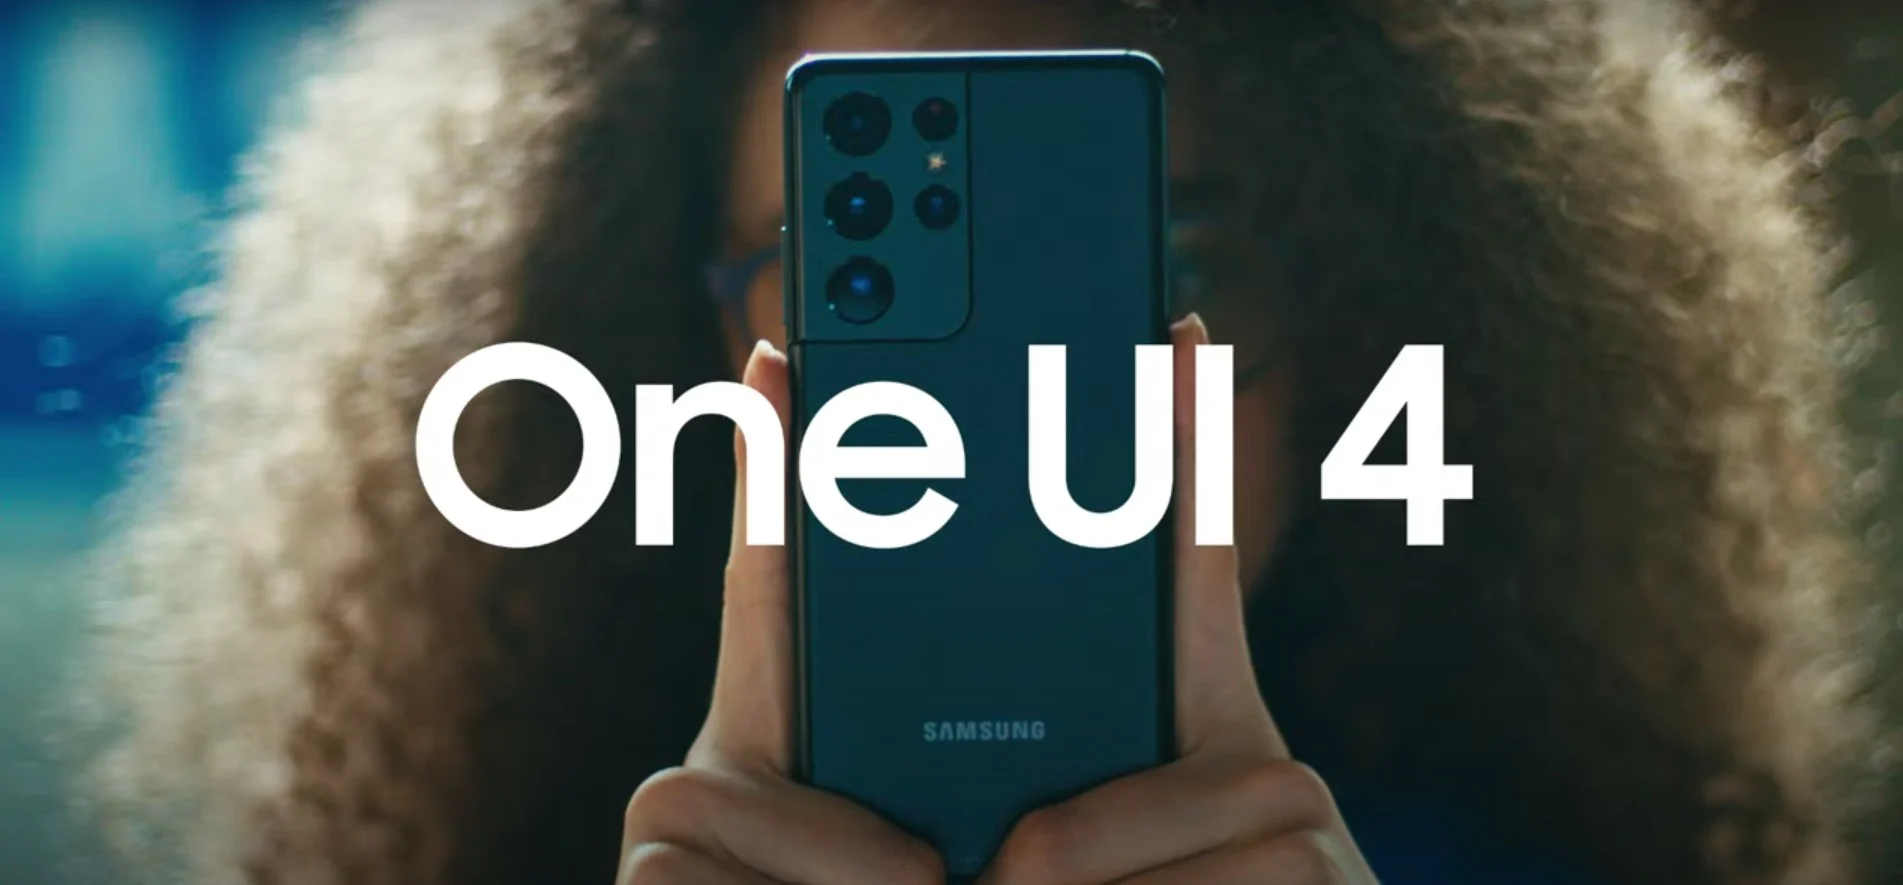 Two inexpensive Samsung smartphones will receive One UI 4.0 ahead of schedule